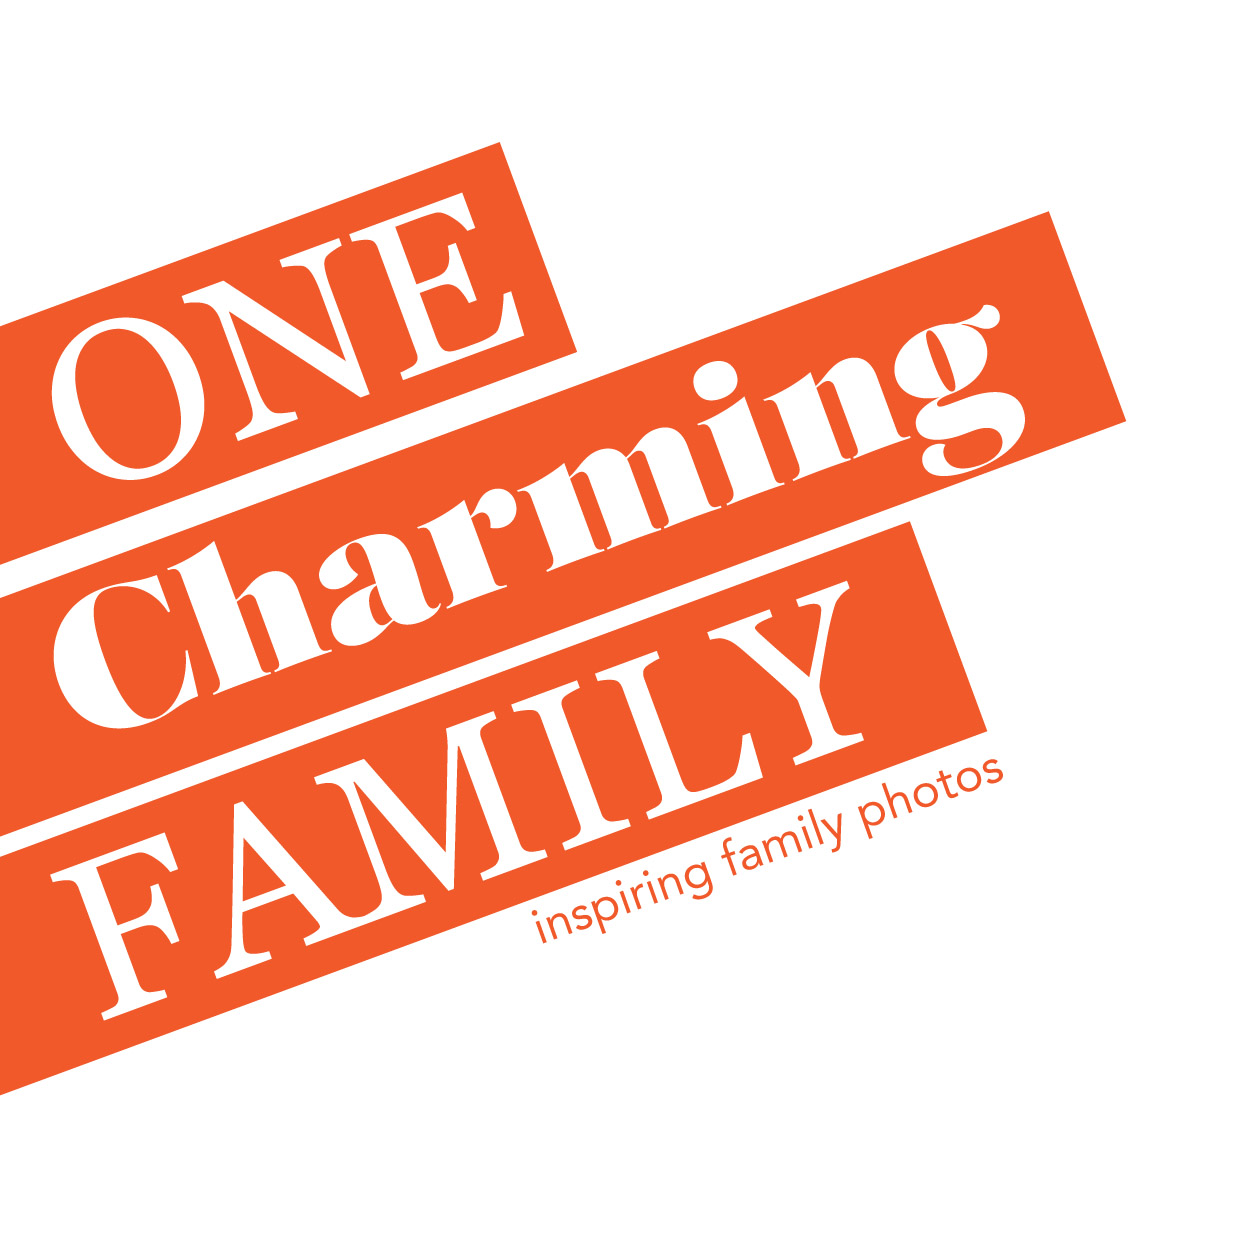 One charming Family